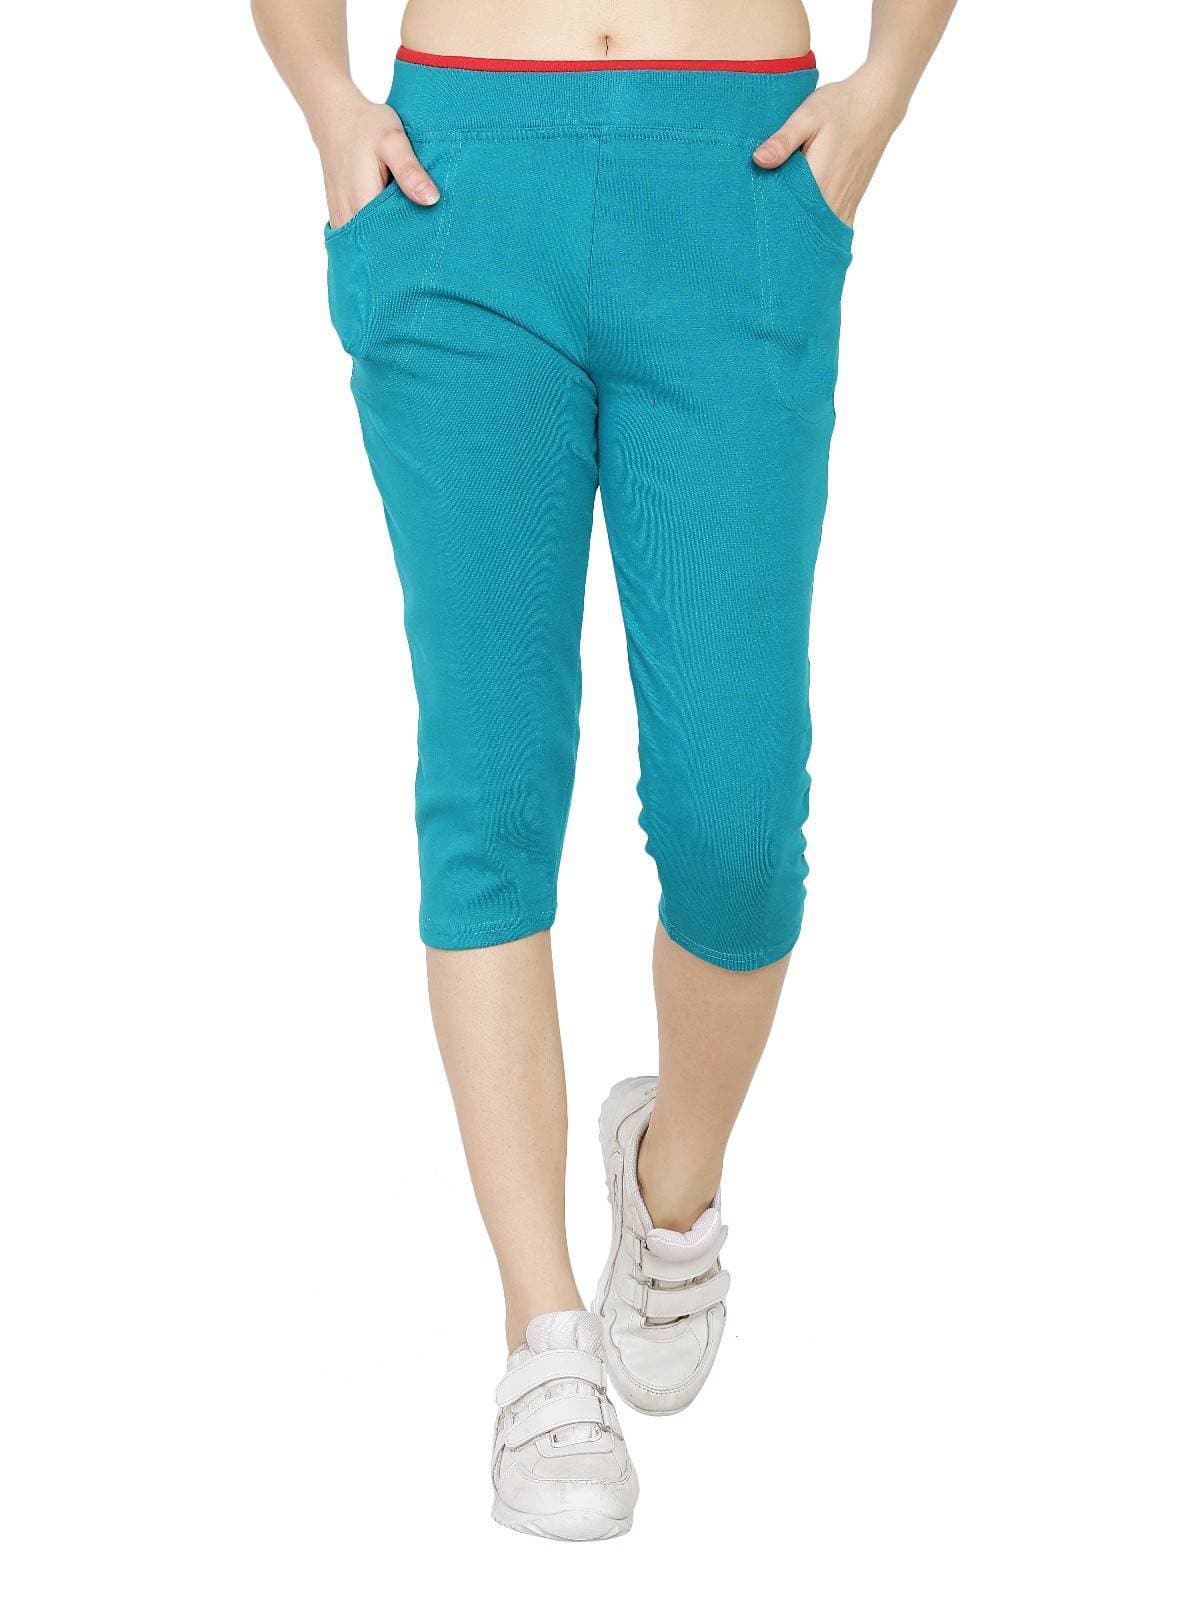 Asmaani Turquoise Color Capri Type with Two Side Pockets.